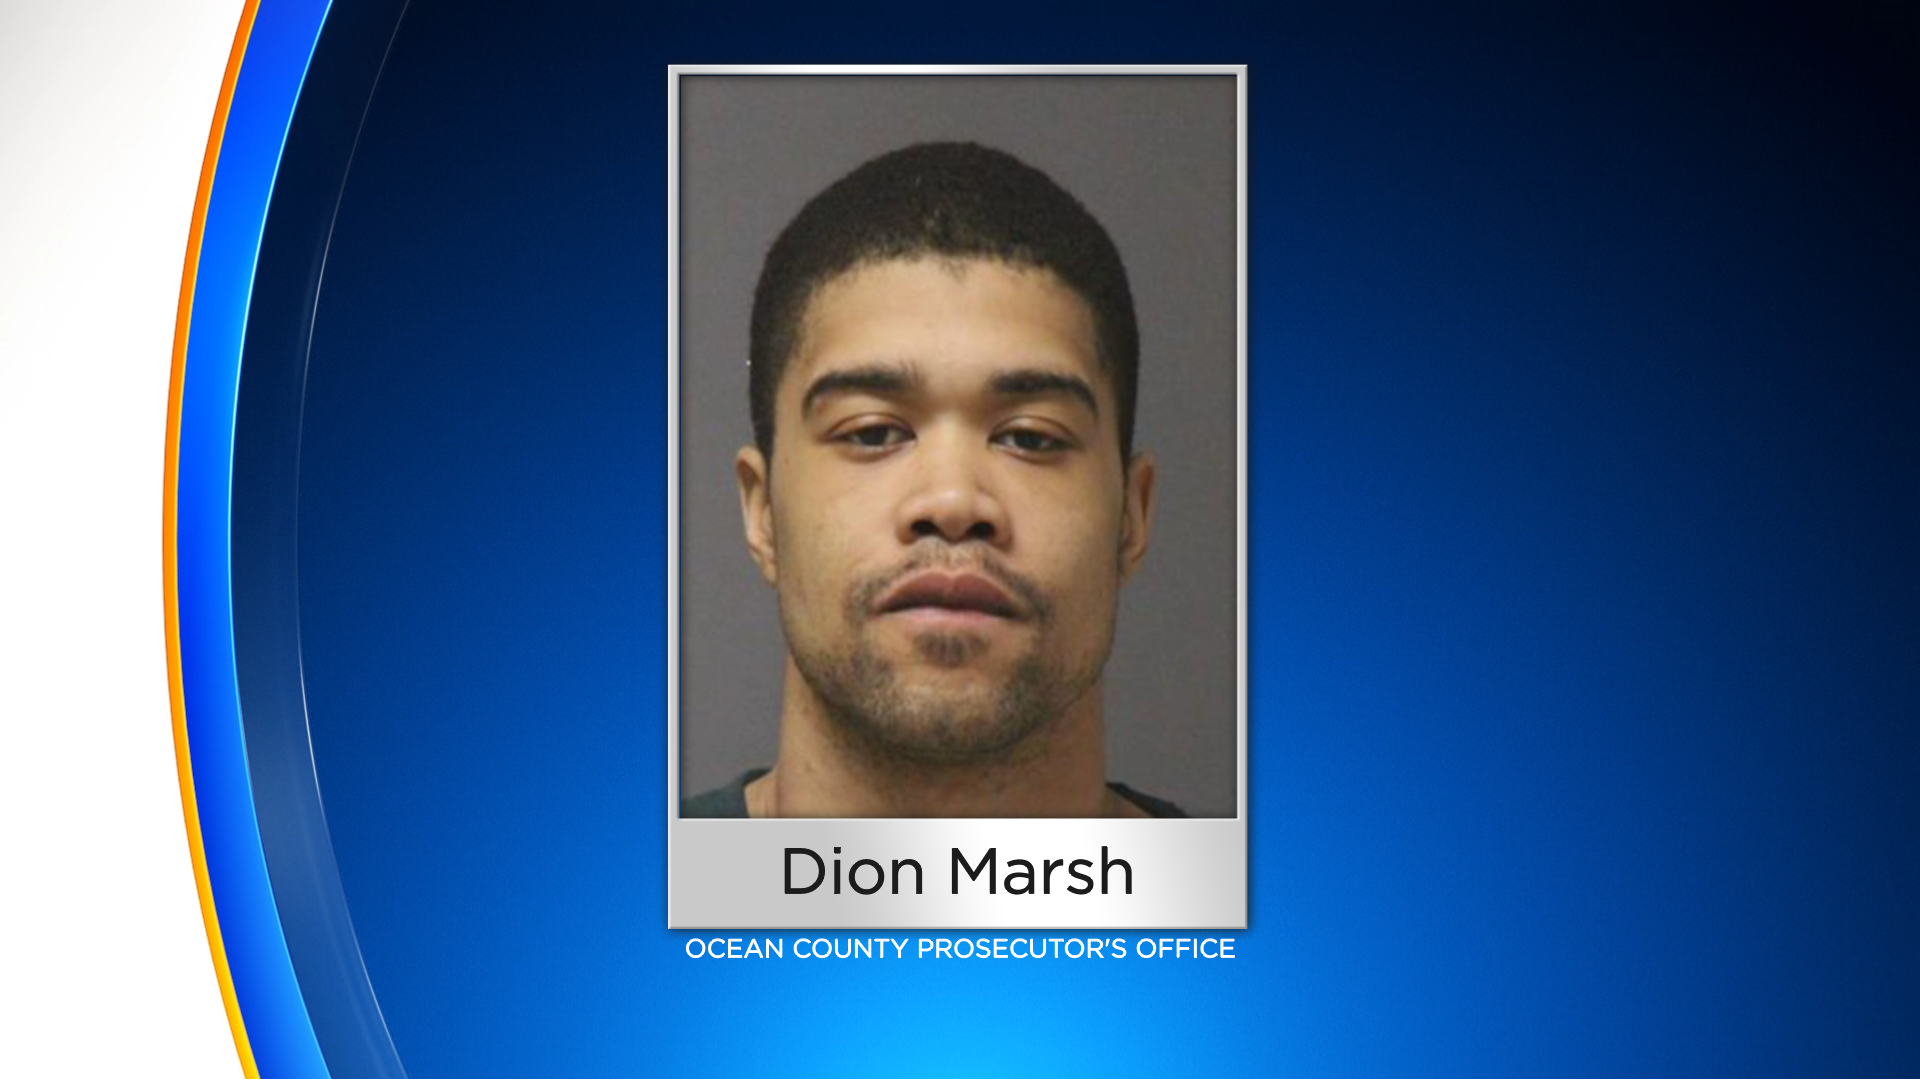 Dion Marsh Charged With Attempted Murder, Carjacking After Crime Spree In Lakewood Township, New Jersey: Officials